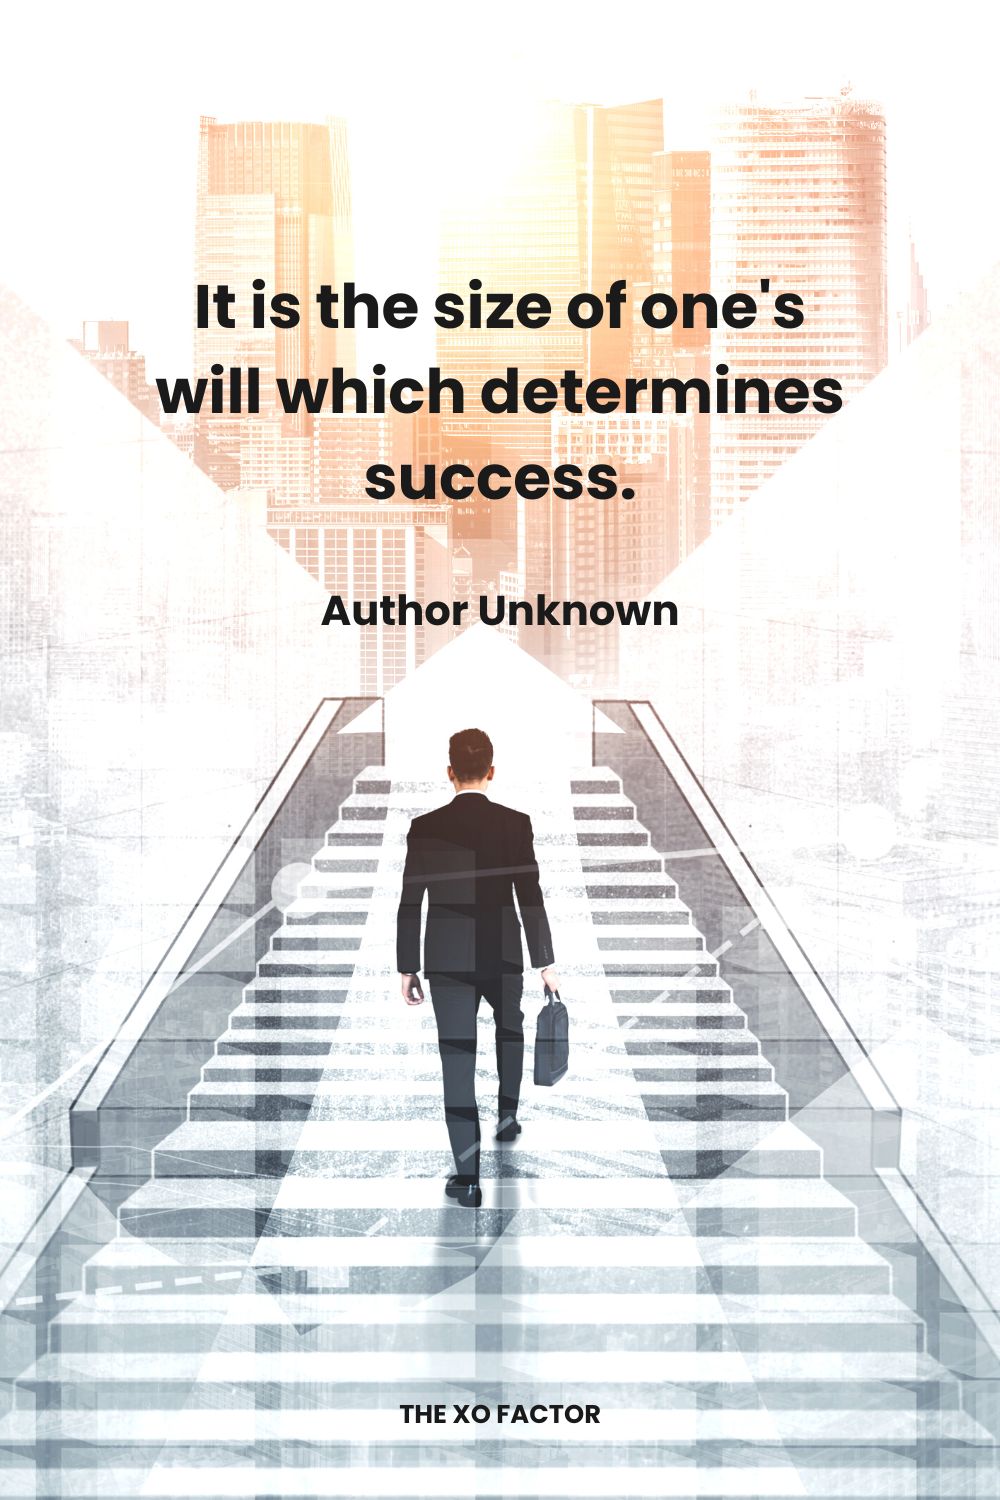 It is the size of one's will which determines success. Author Unknown